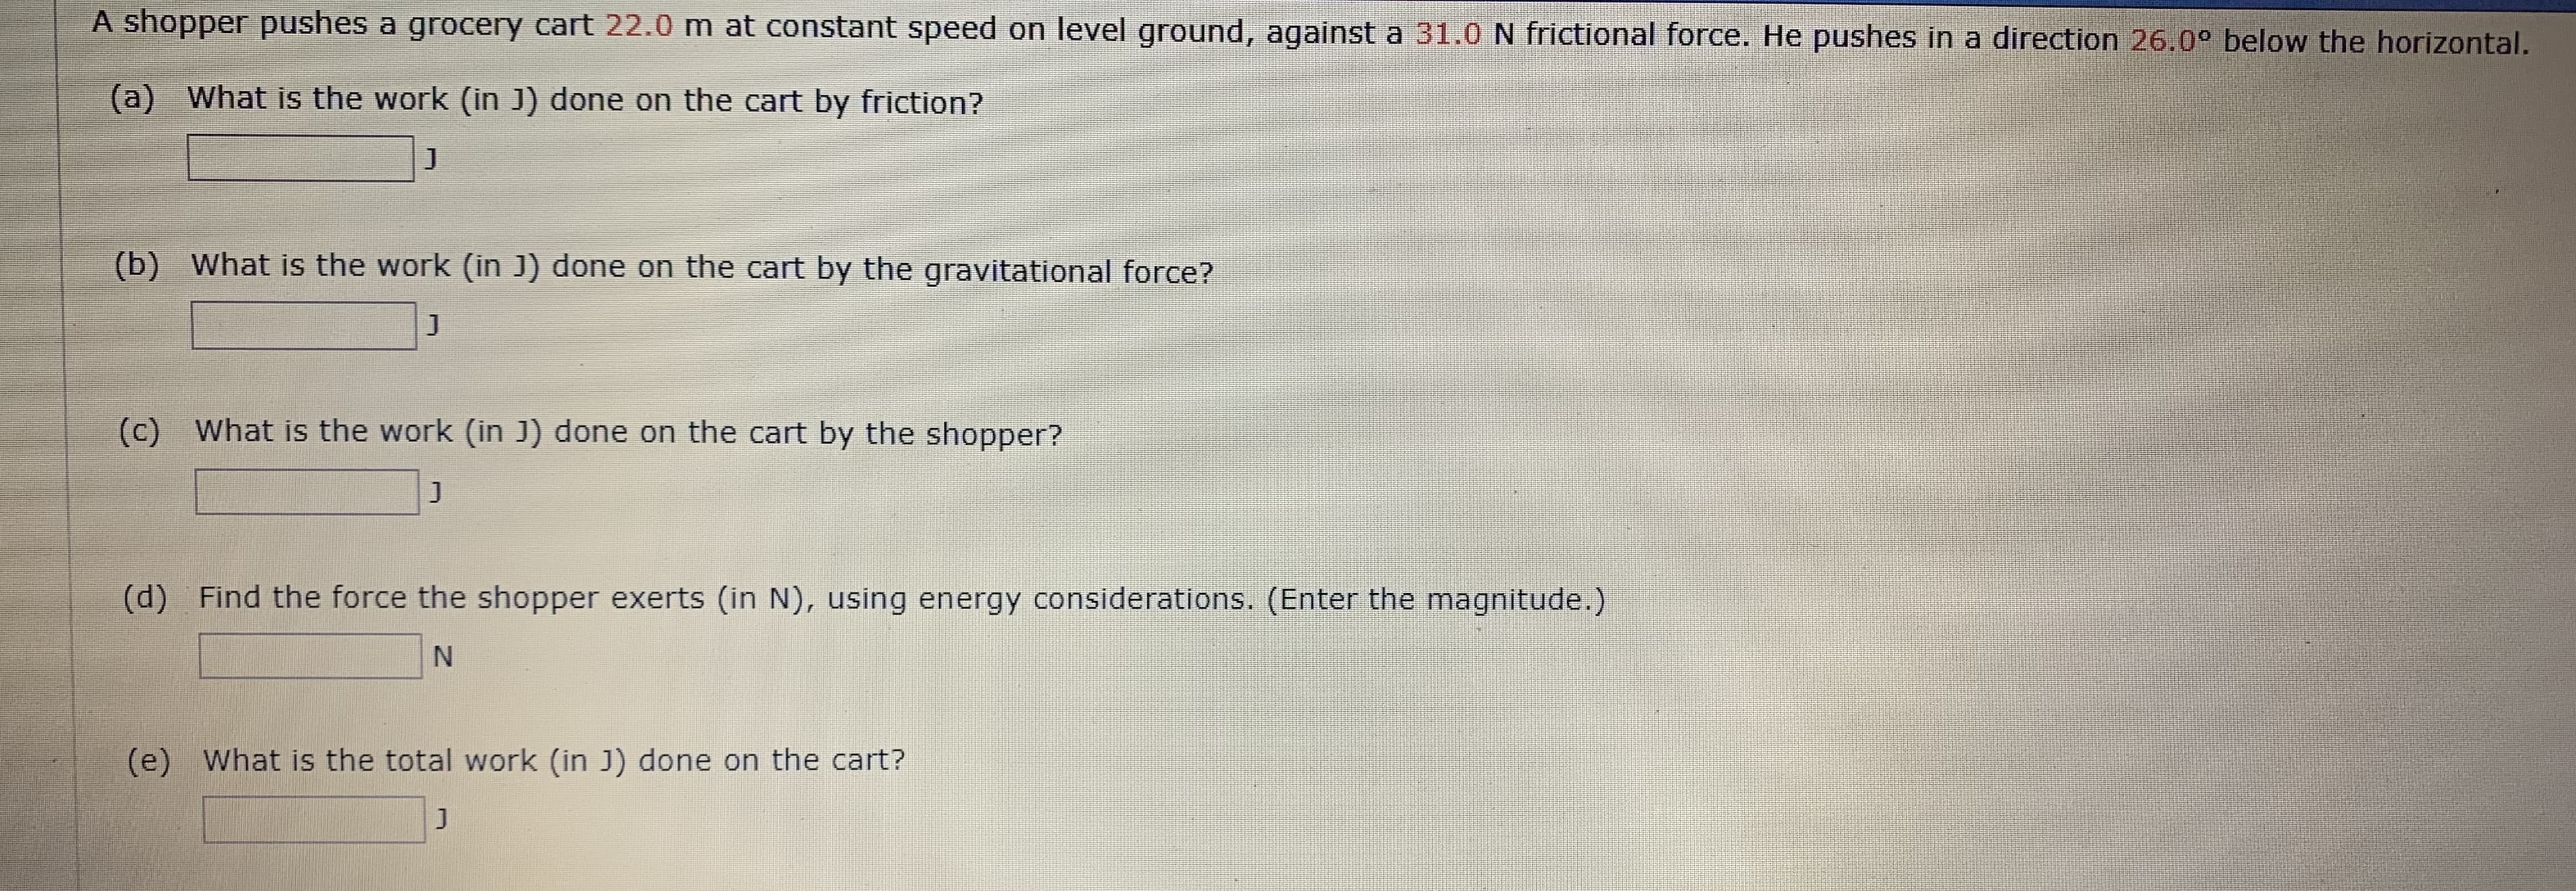 A shopper pushes a grocery cart 22.0 m at constant speed on level ground, against a 31.0 N frictional force. He pushes in a direction 26.00 below the horizontal.
(a) What is the work (in J) done on the cart by friction?
J
(b) What is the work (in J) done on the cart by the gravitational force?
J
(c) What is the work (in J) done on the cart by the shopper?
J
Find the force the shopper exerts (in N), using energy considerations. (Enter the magnitude.)
(d)
N
What is the total work (in J) done on the cart?
(e)
J
